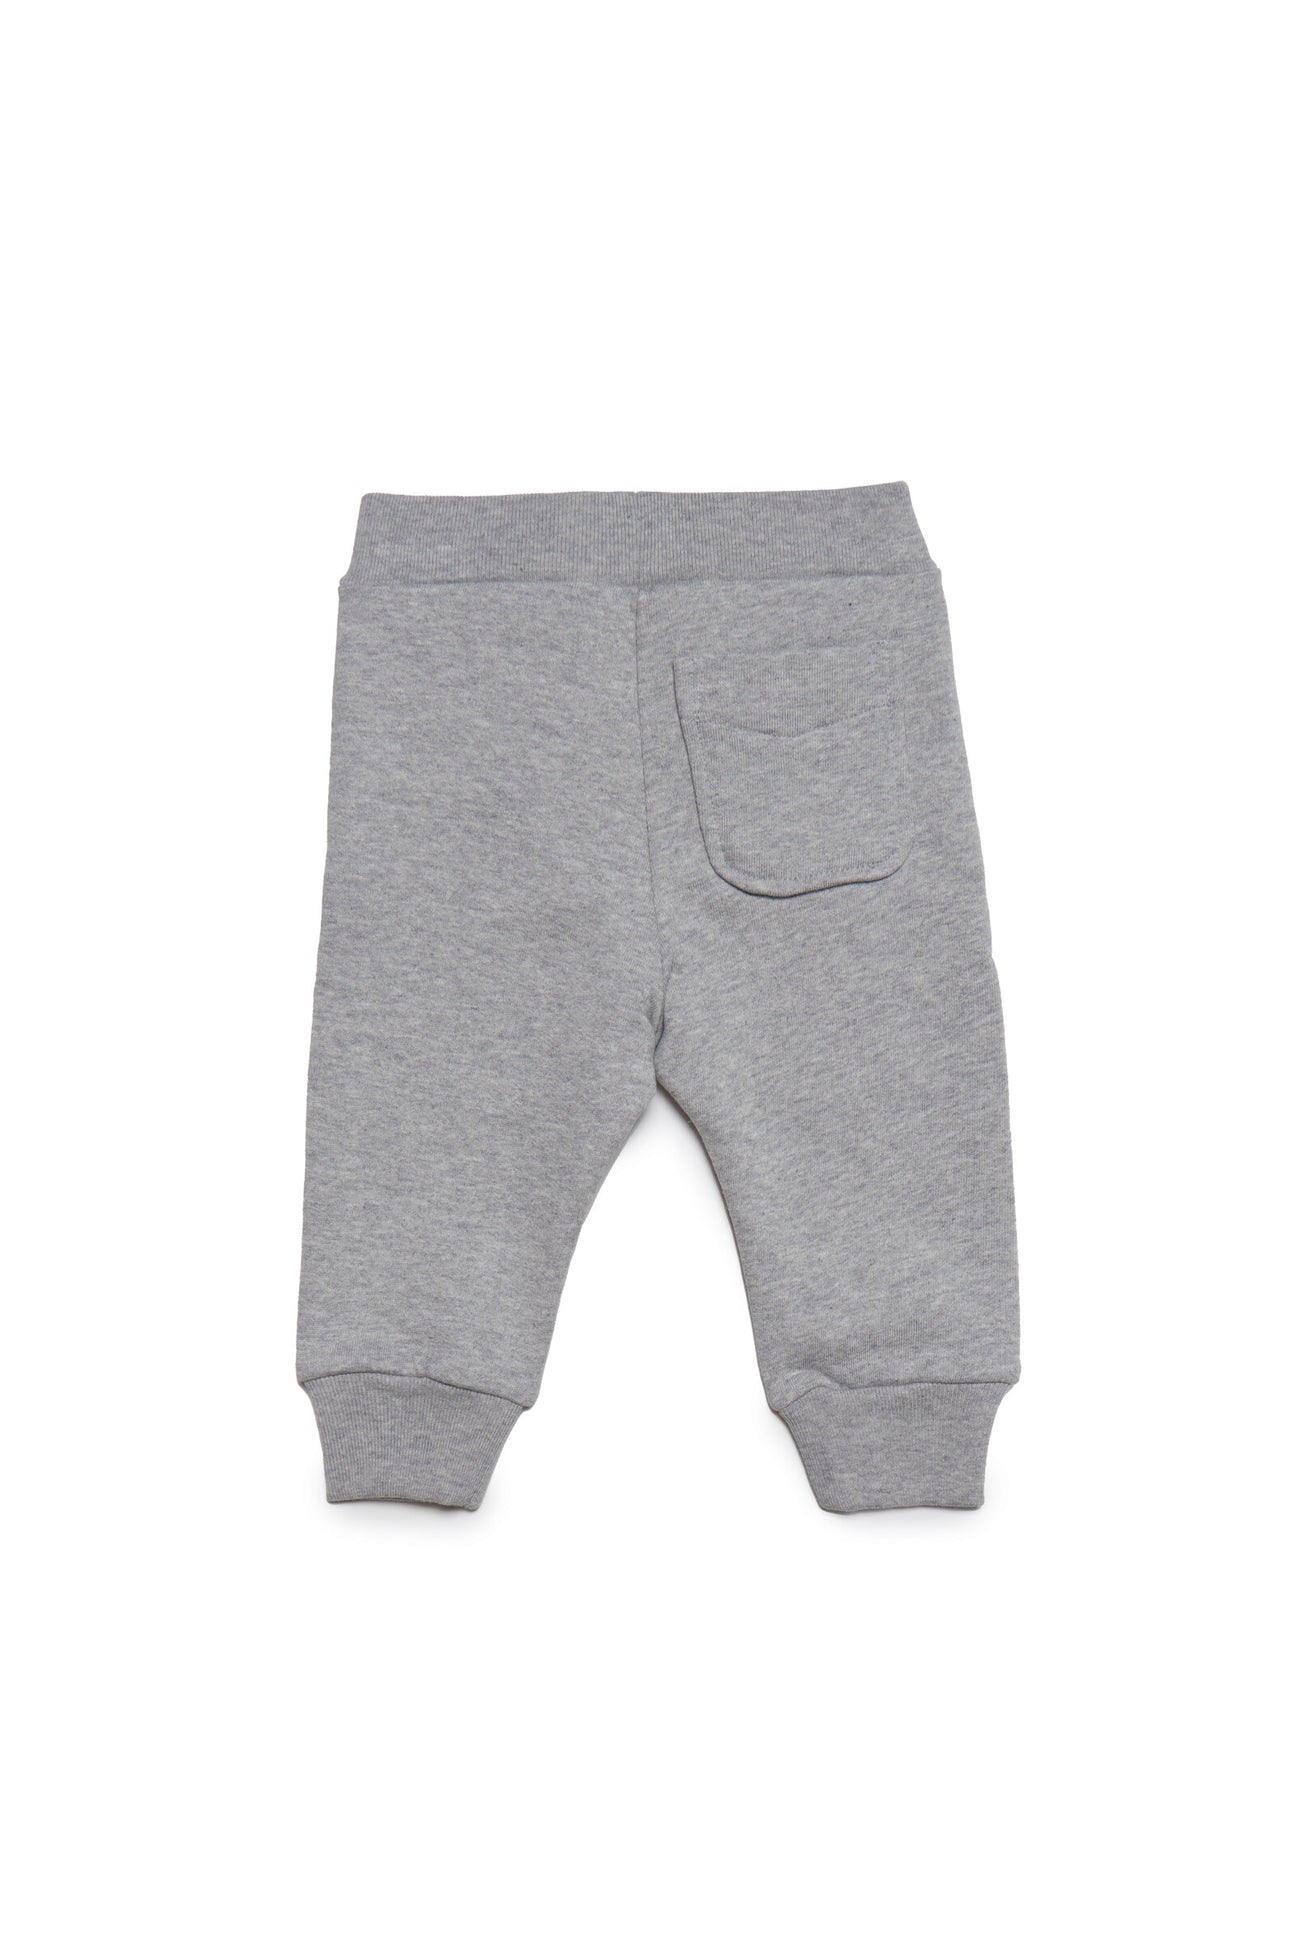 Gray jogger pants with Diesel double logo and back pocket Gray jogger pants with Diesel double logo and back pocket